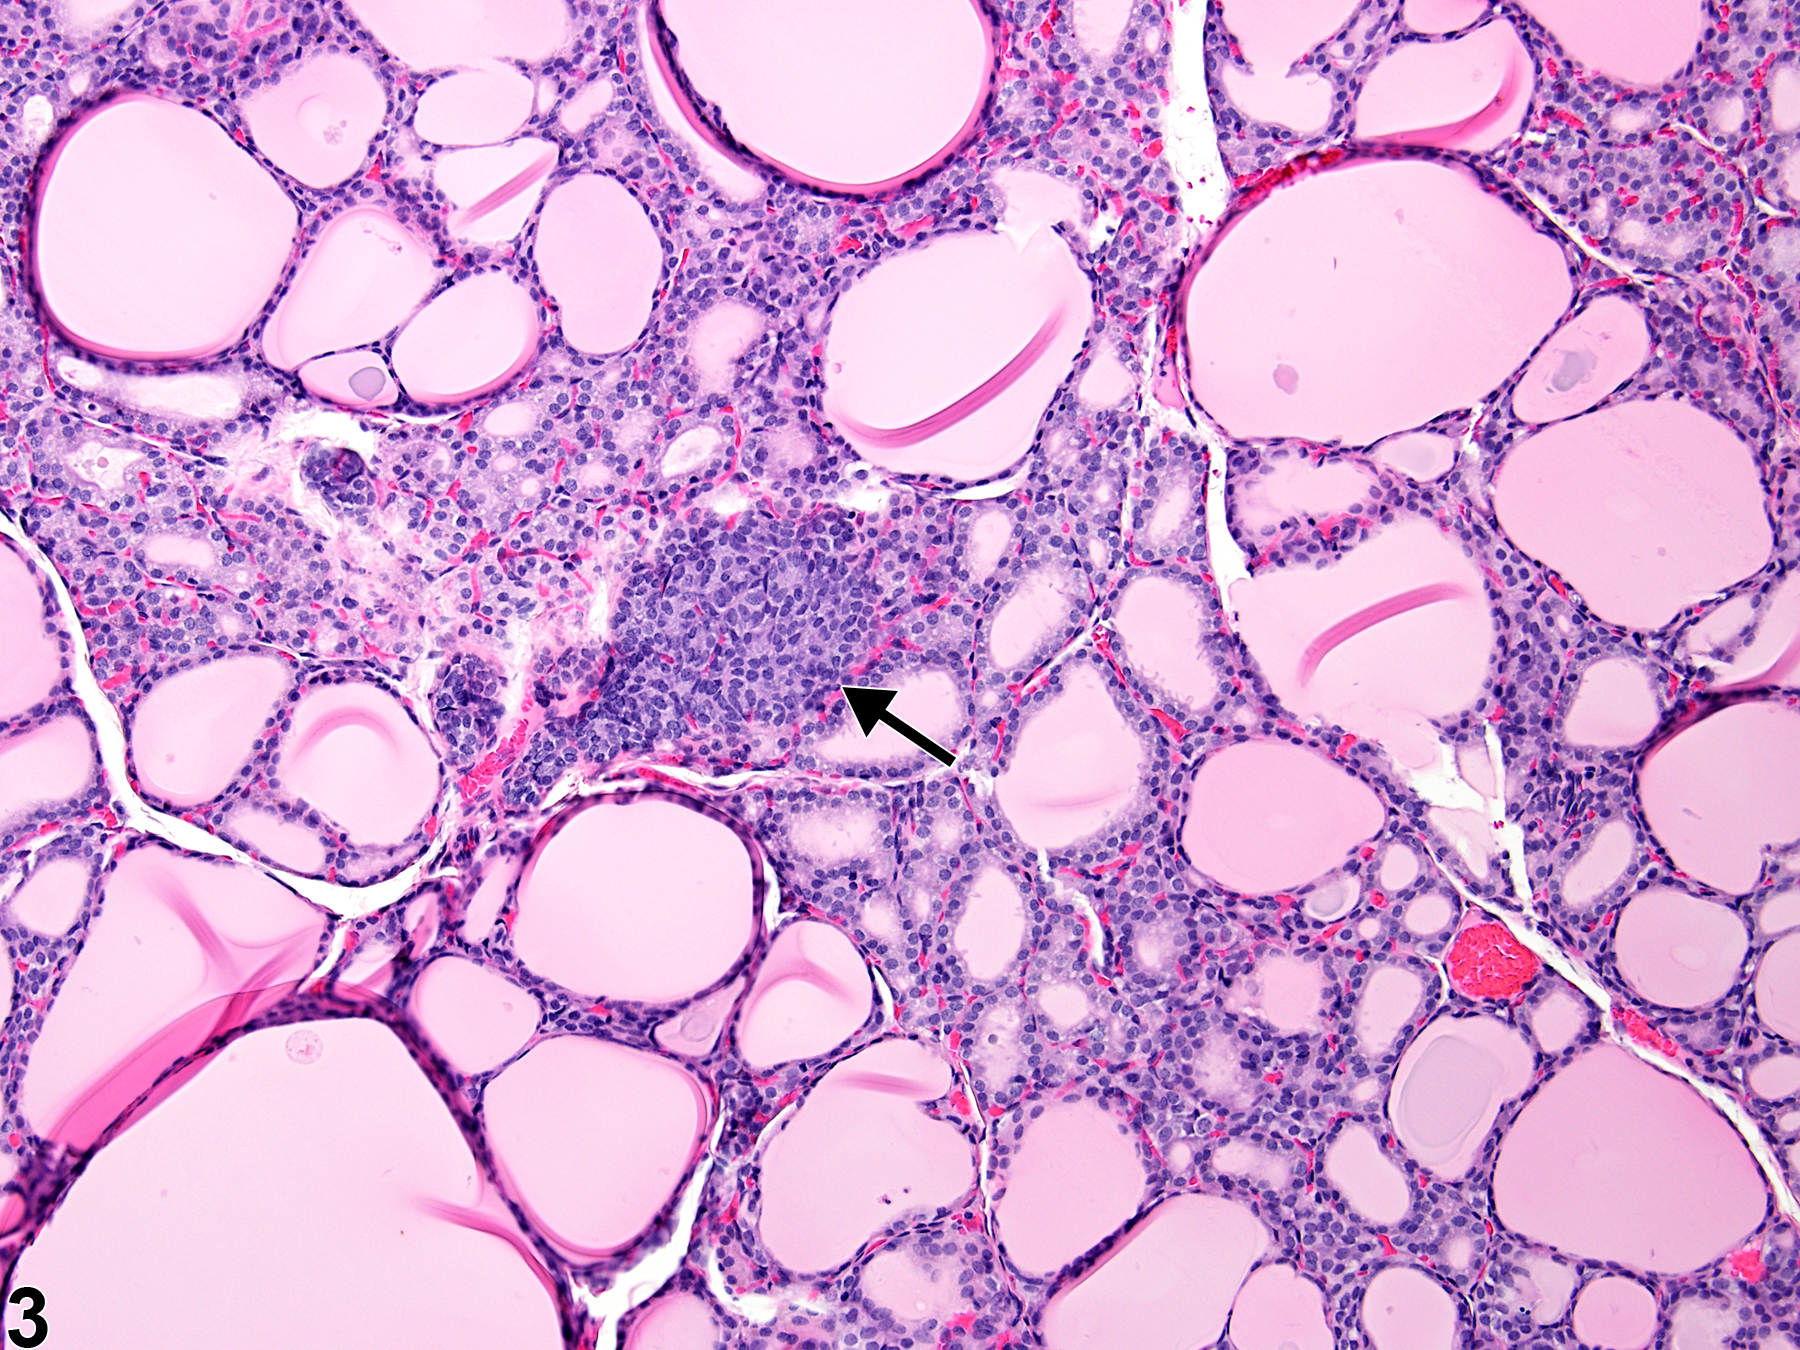 Image of C cell hyperplasia in the thyroid gland from a male F344/N rat in a chronic study